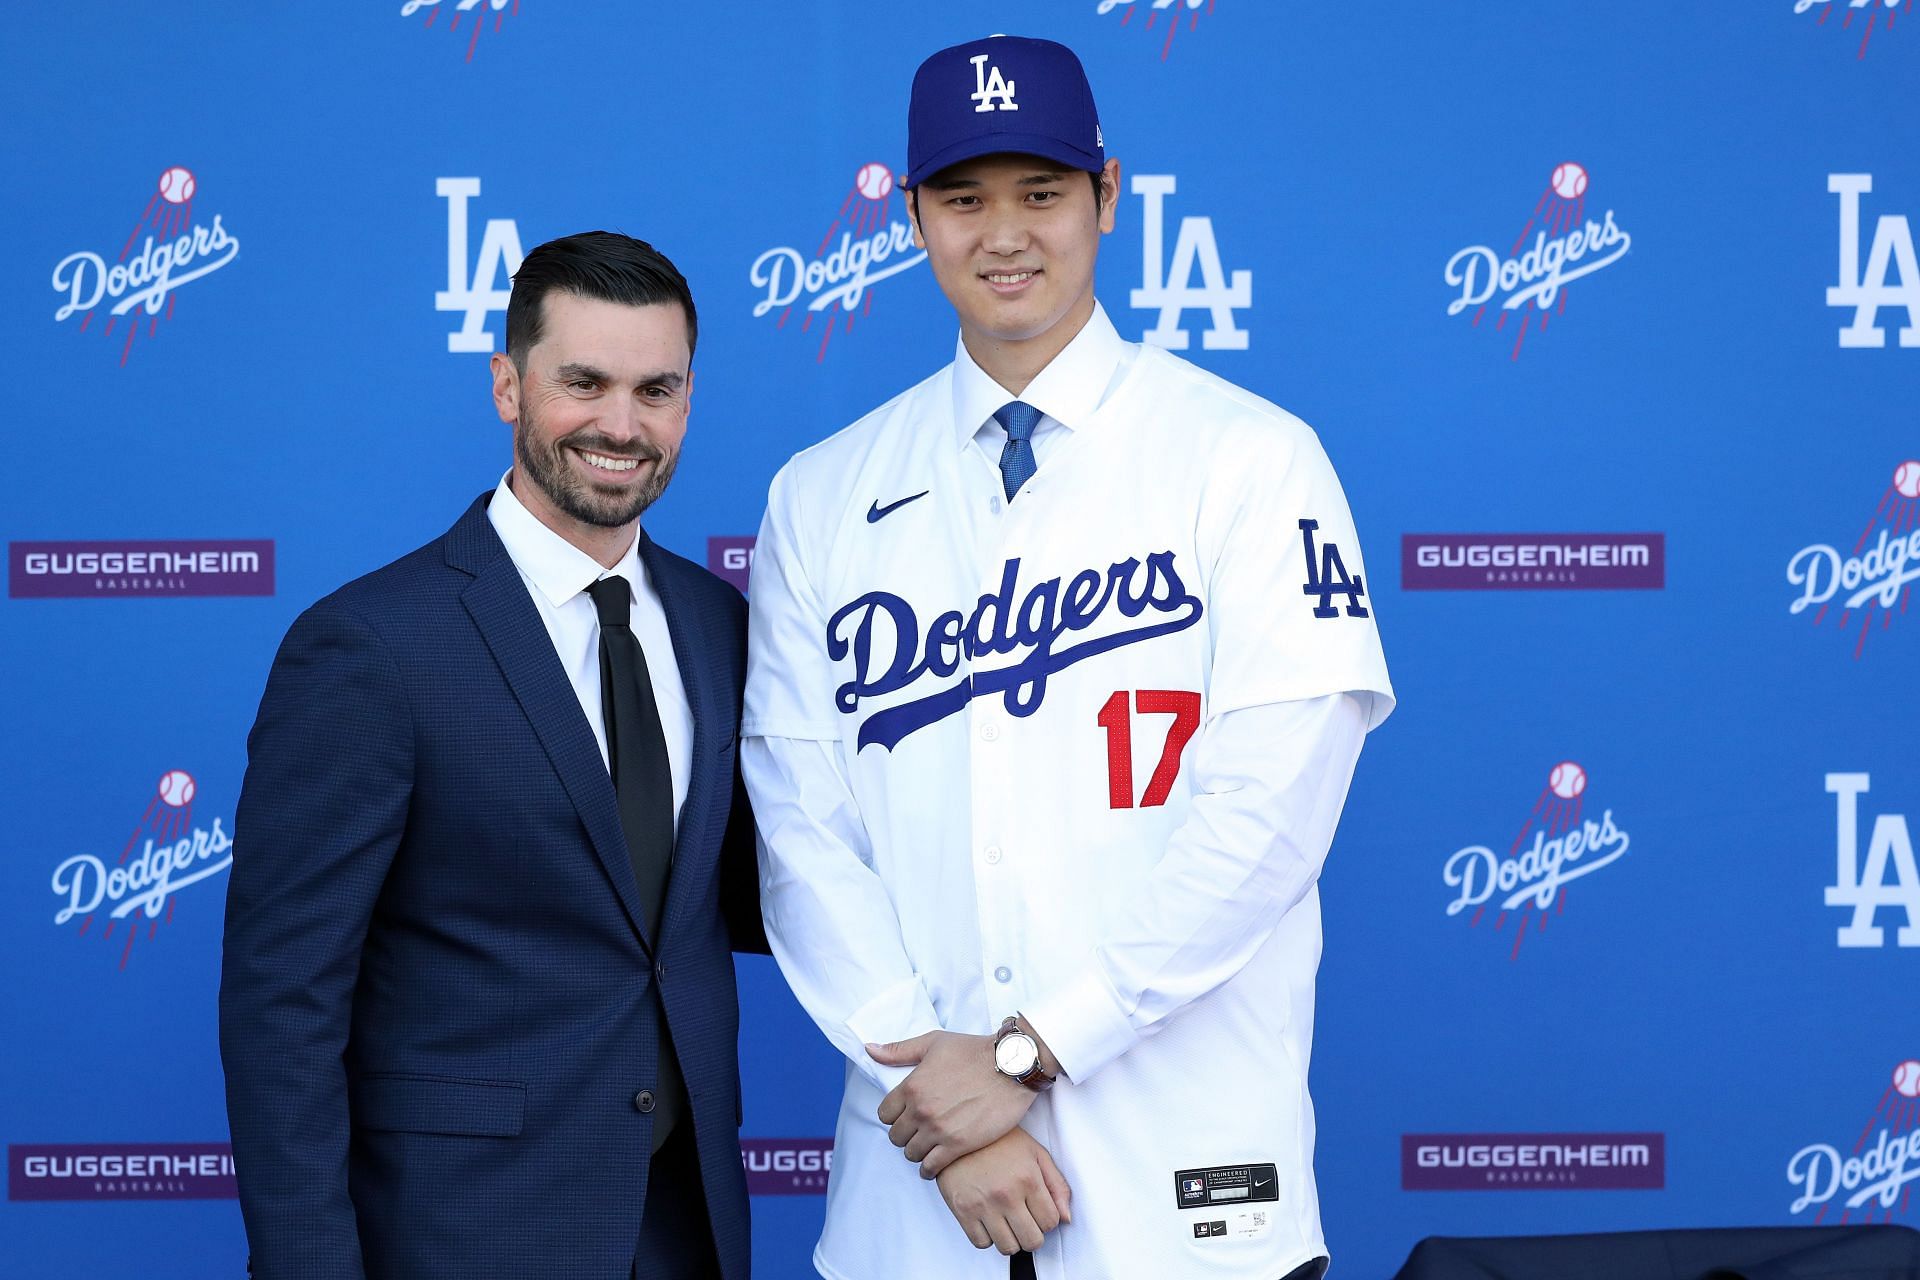 The LA Dodgers signed Shohei Ohtani back in early December which shocked the sports world with a $700 million 10-year contract.